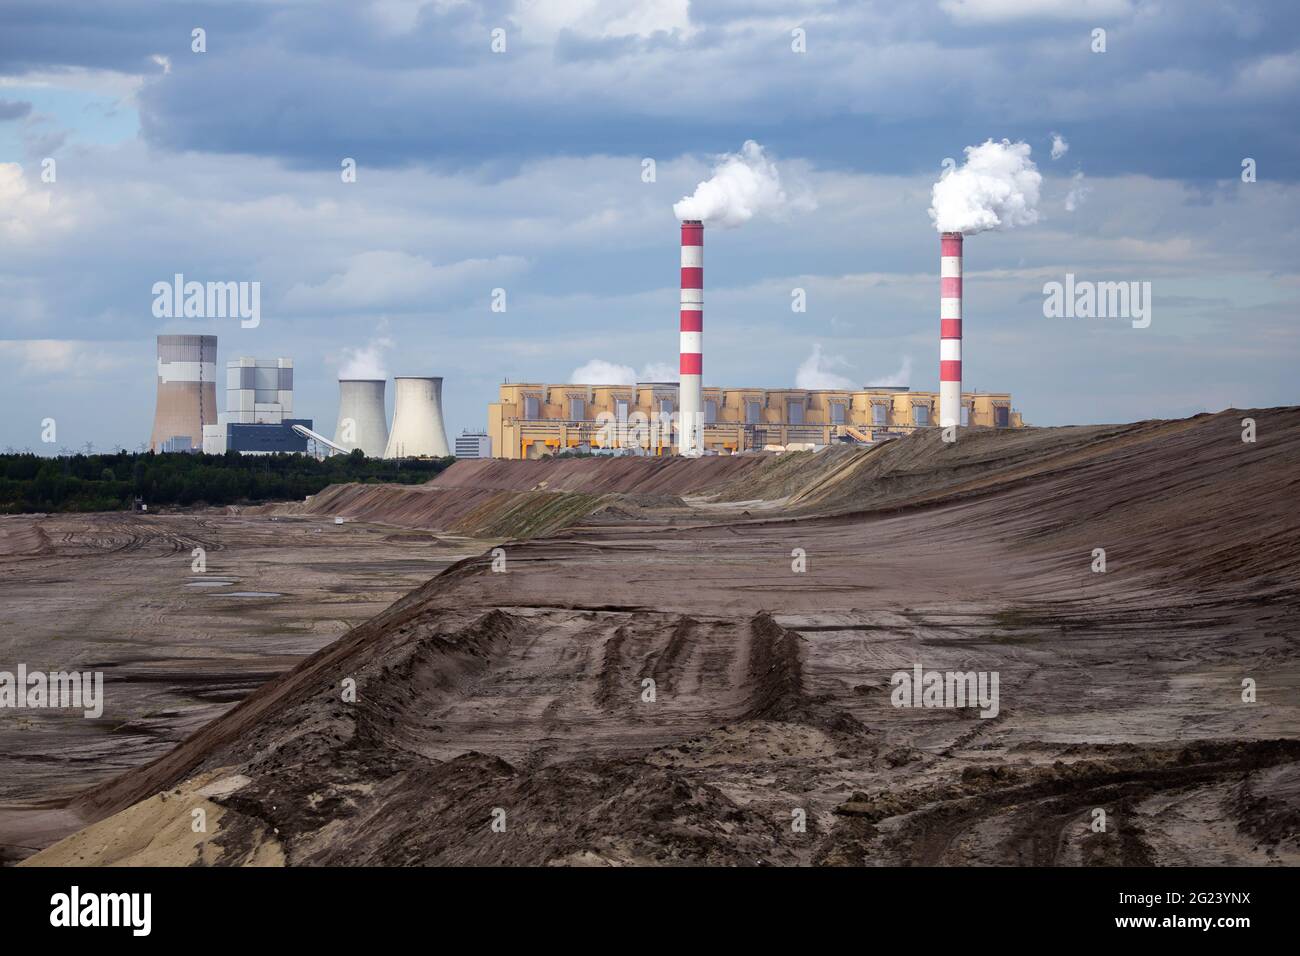 A view of a lignite-fired power plant against the background of an opencast coal mine. Photo taken in daylight. Lots of little clouds in the sky Stock Photo